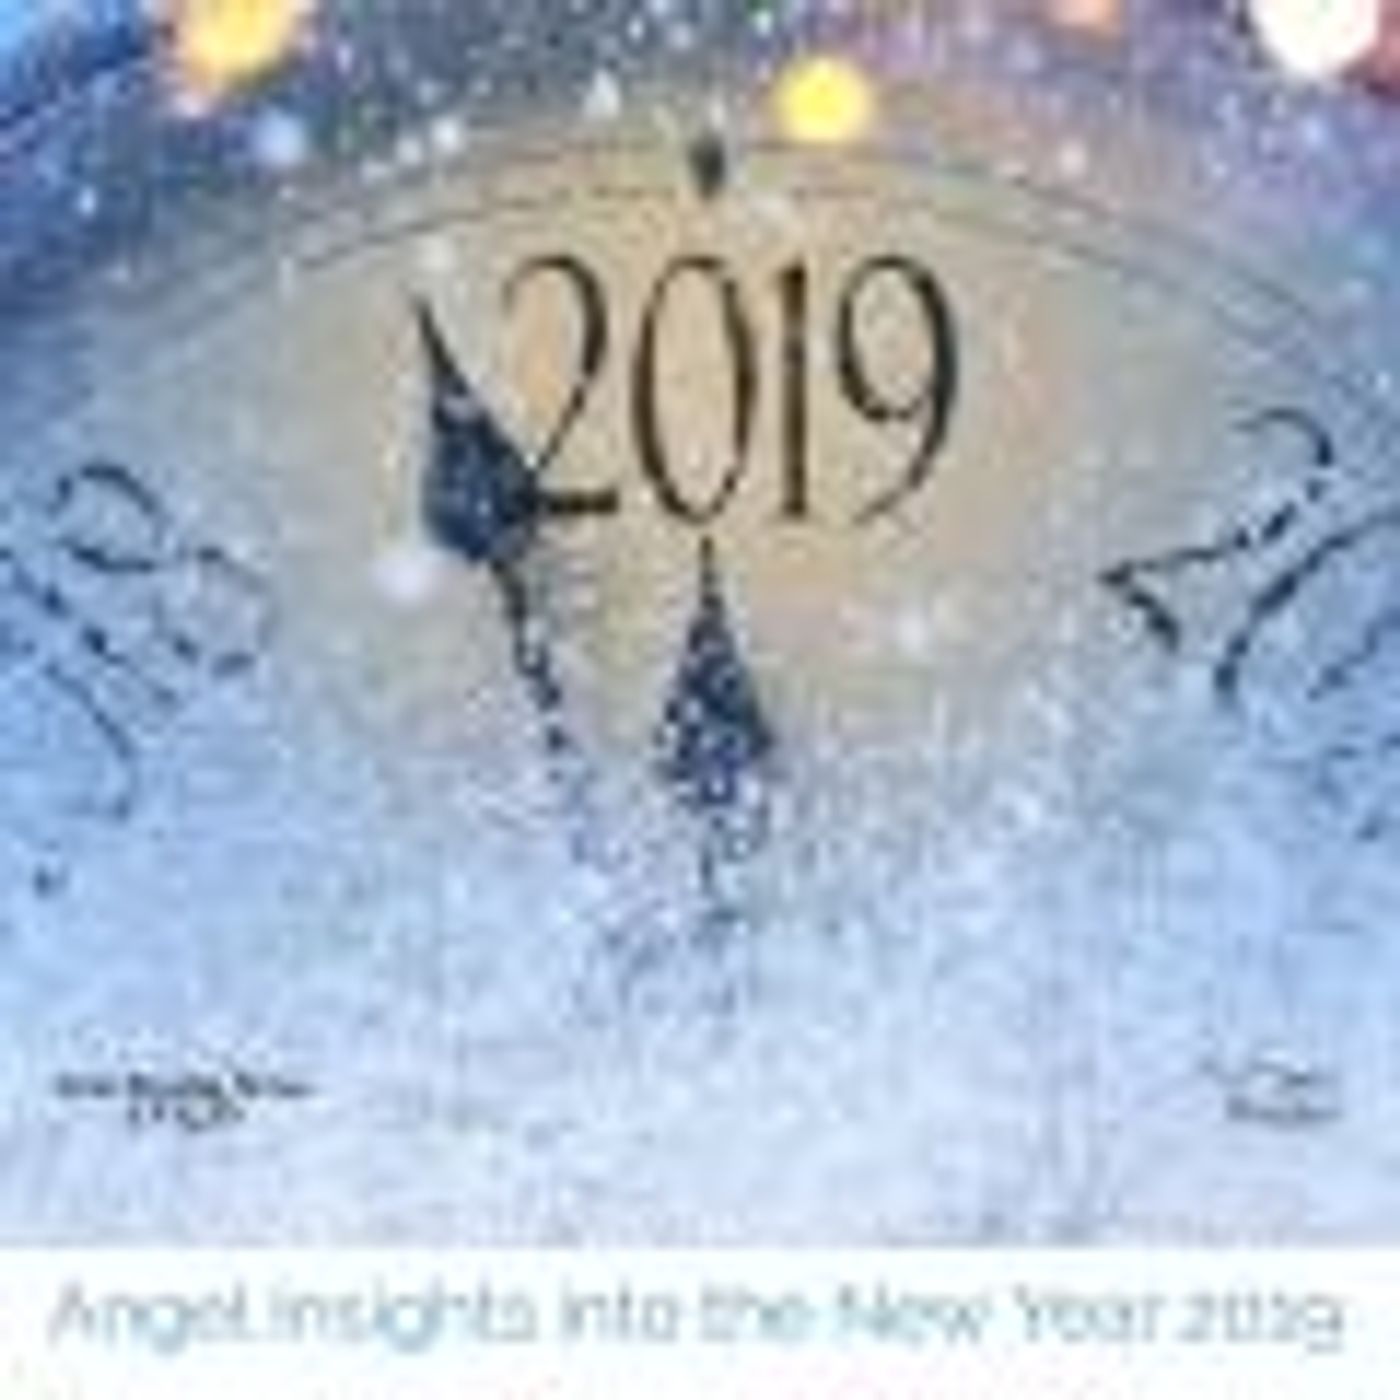 Angel Insights into the New Year 2019